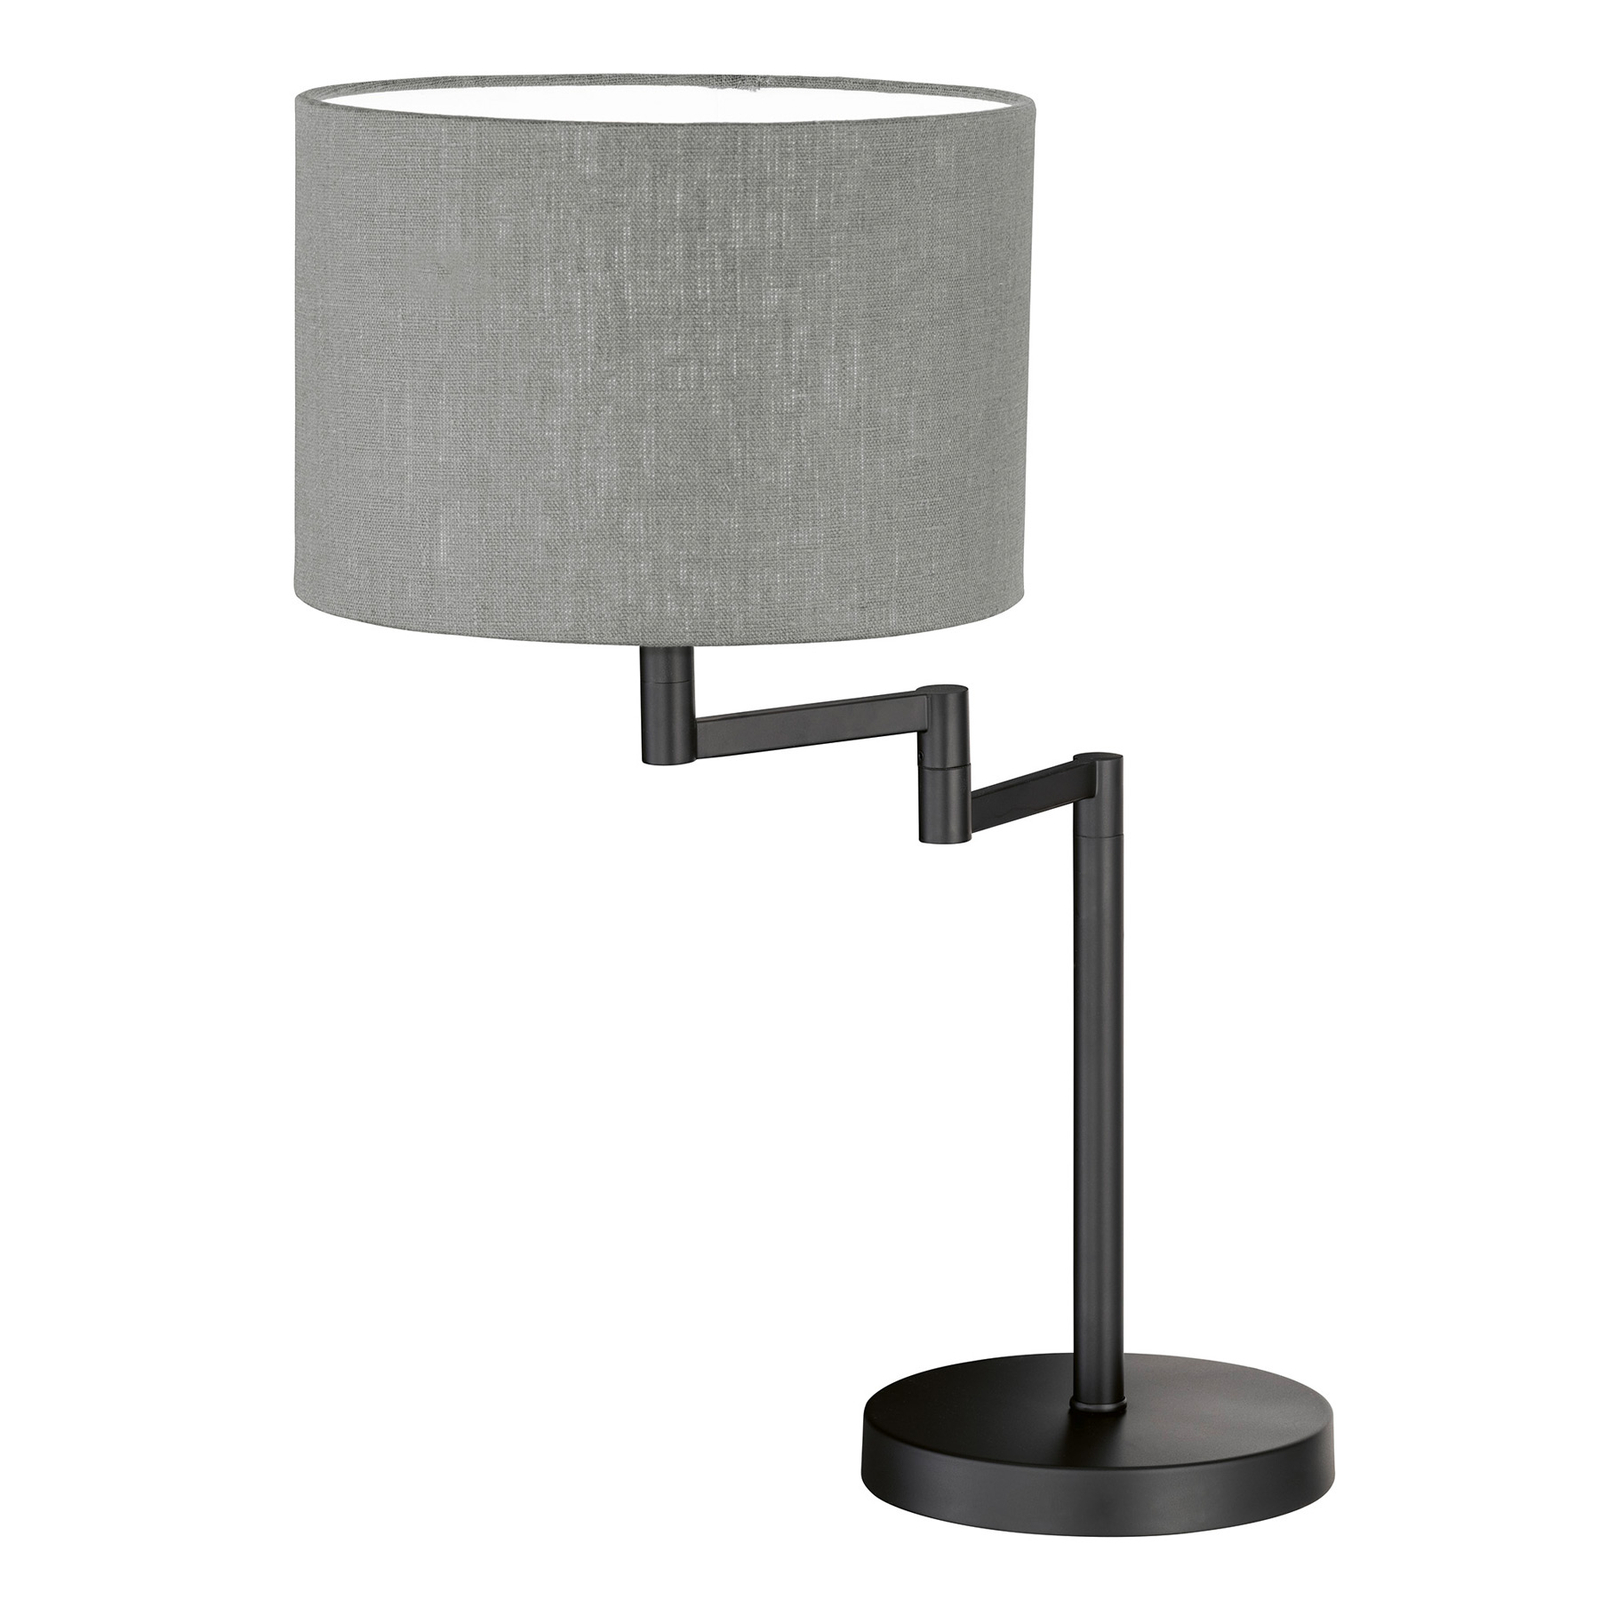 Rota table lamp with grey linen lampshade